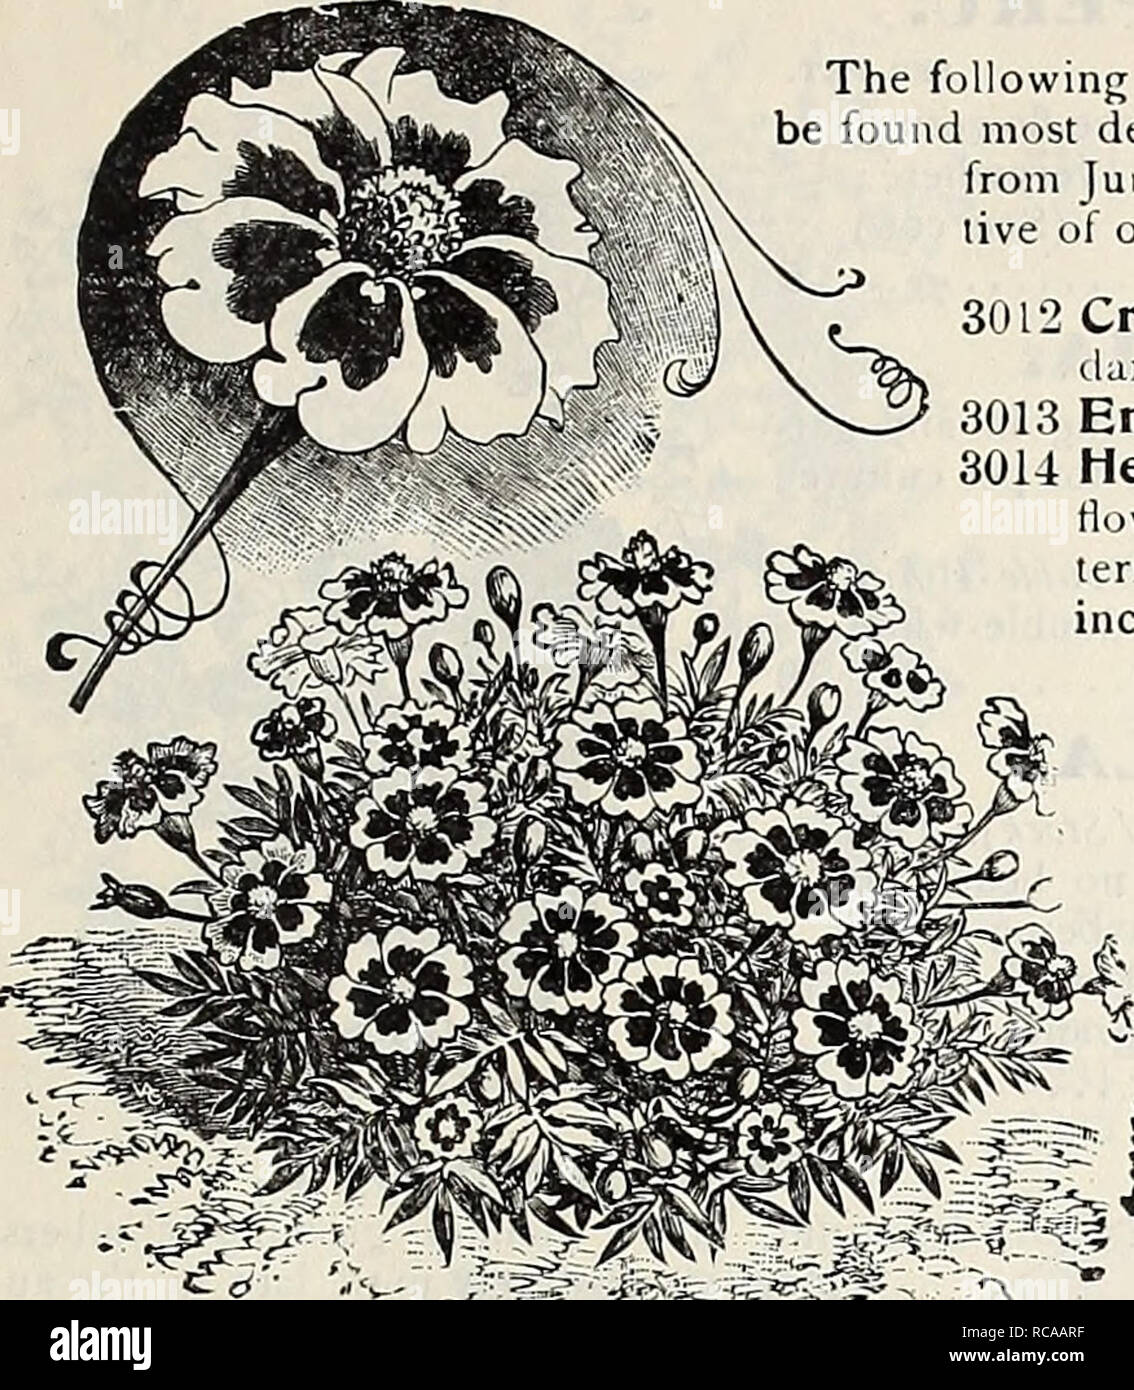 . Dreer's 1907 garden book. Seeds Catalogs; Nursery stock Catalogs; Gardening Equipment and supplies Catalogs; Flowers Seeds Catalogs; Vegetables Seeds Catalogs; Fruit Seeds Catalogs. HBWADRH-PHILADELPHIA W'W RELIABLE FLOWER SEE 83. LOBELIA. ng dwarf and trailing varieties of this popular and beautiful flowering plant will desirable for pot culture, edgings, hanging-baskets, etc., blooming profusely June to November. The hardy perennial varieties are among the most attrac- of our garden favorites, producing beauiiful spikes of handsome flowers. PER PKT. Crystal Palace Compacta. Rich deep blue  Stock Photo